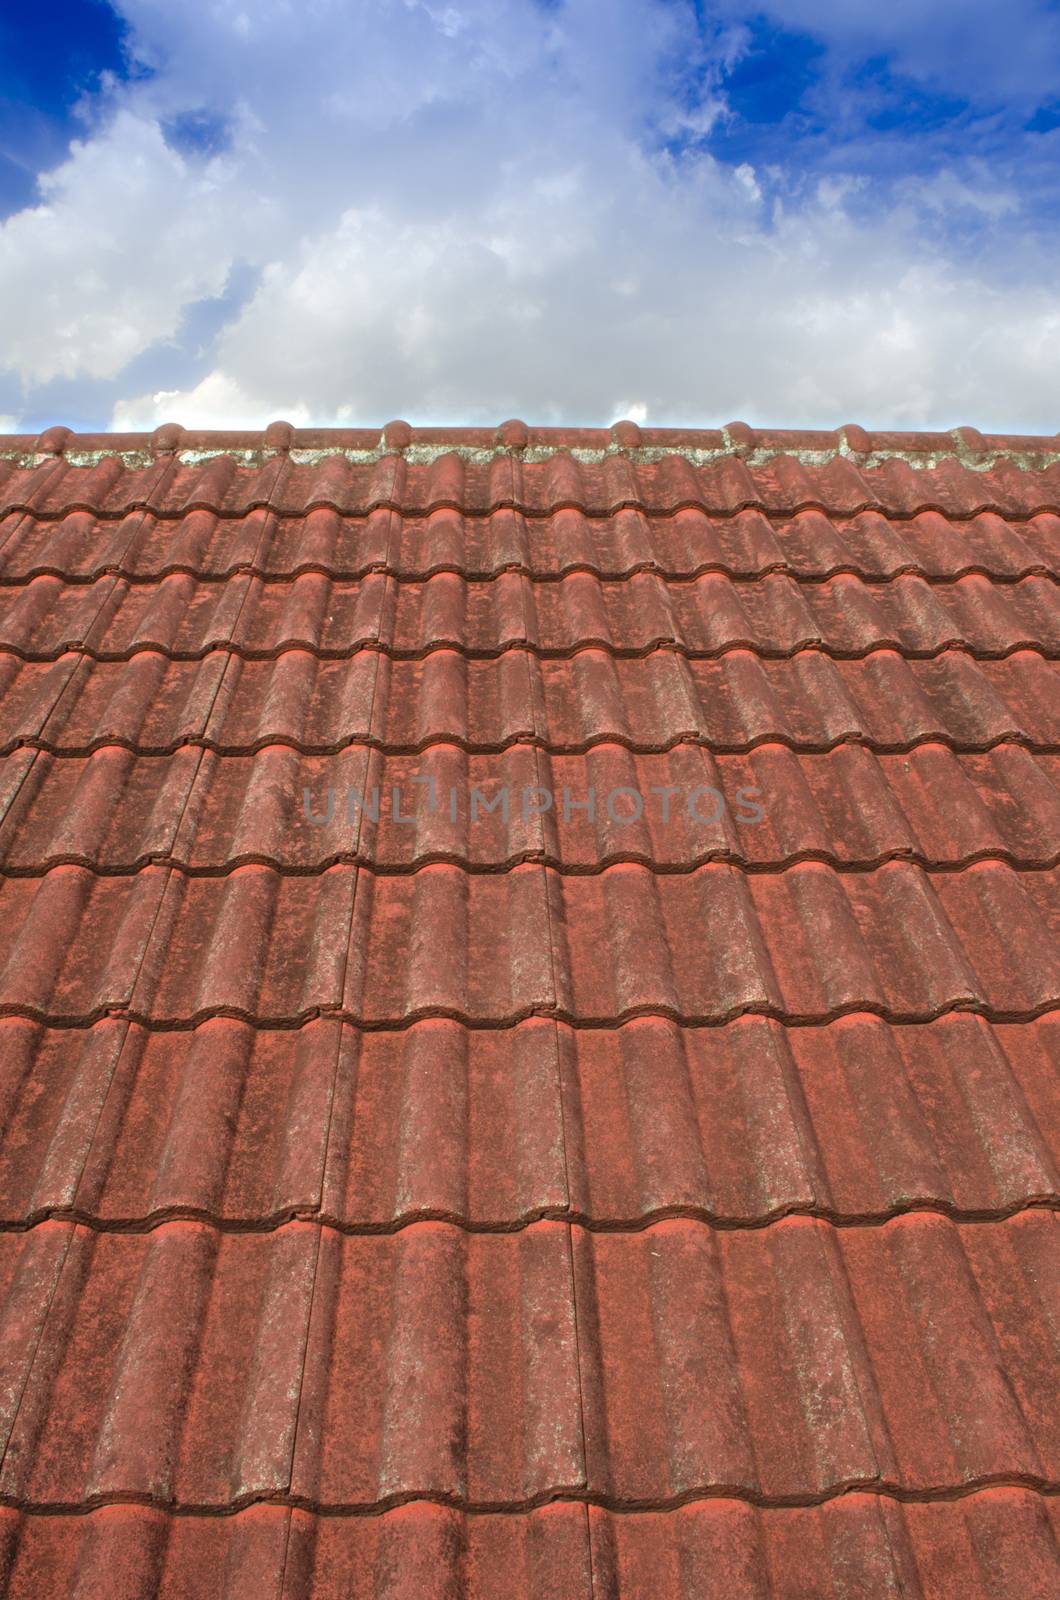 The Tiled Roof with Fluffy Cloud Blue Sky